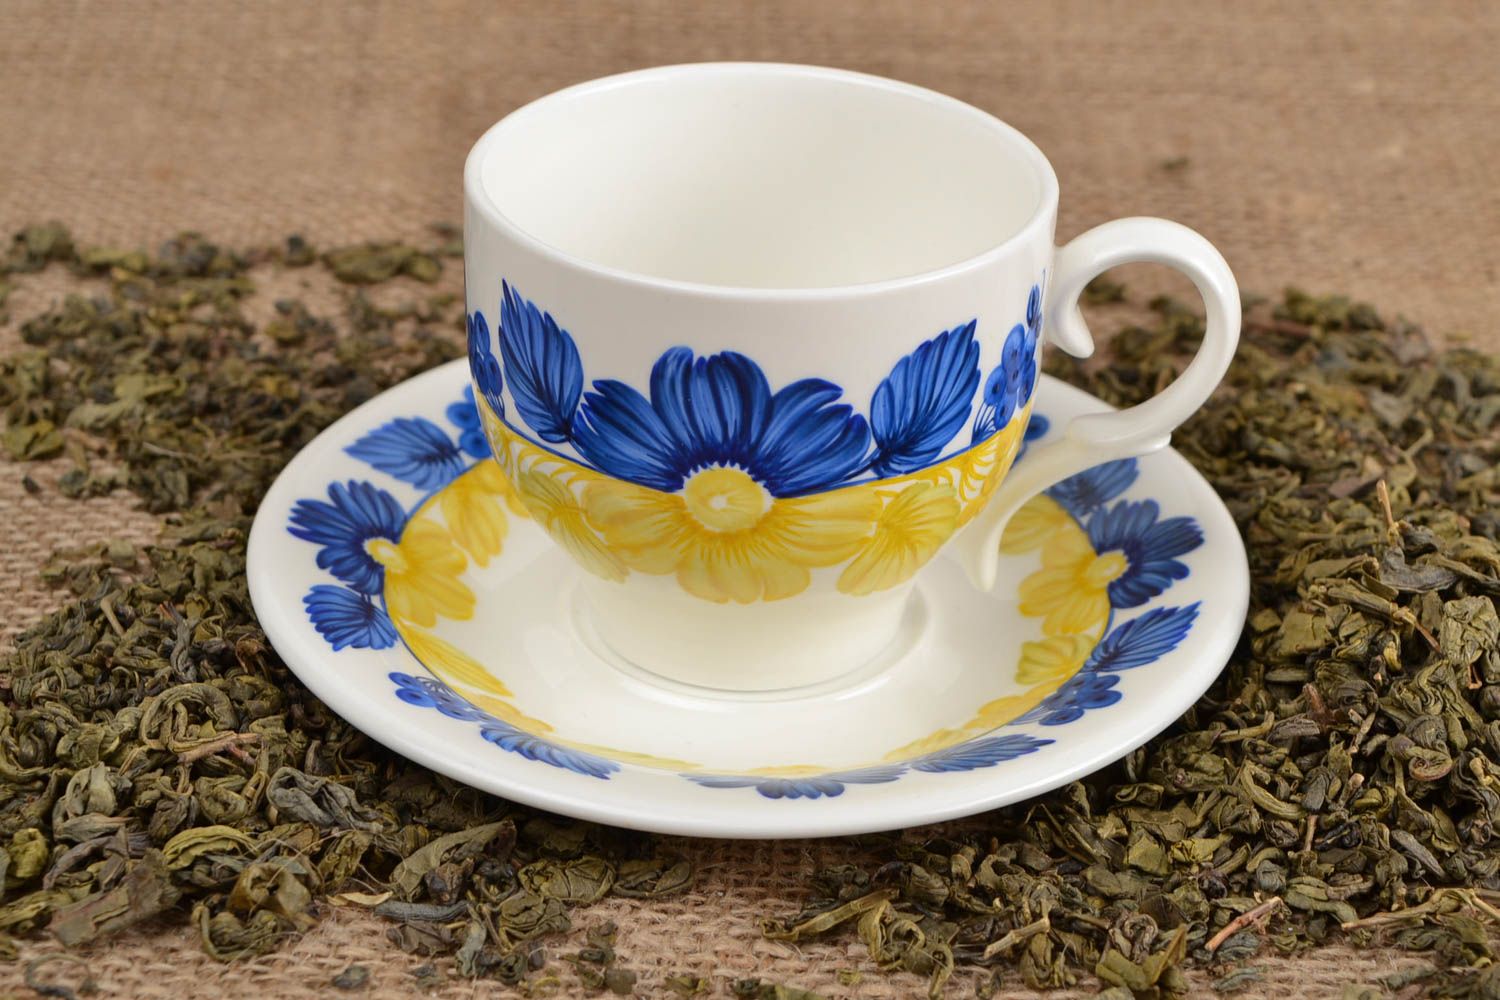 8 oz ceramic cup with handle and saucer in white, blue, yellow colors photo 1